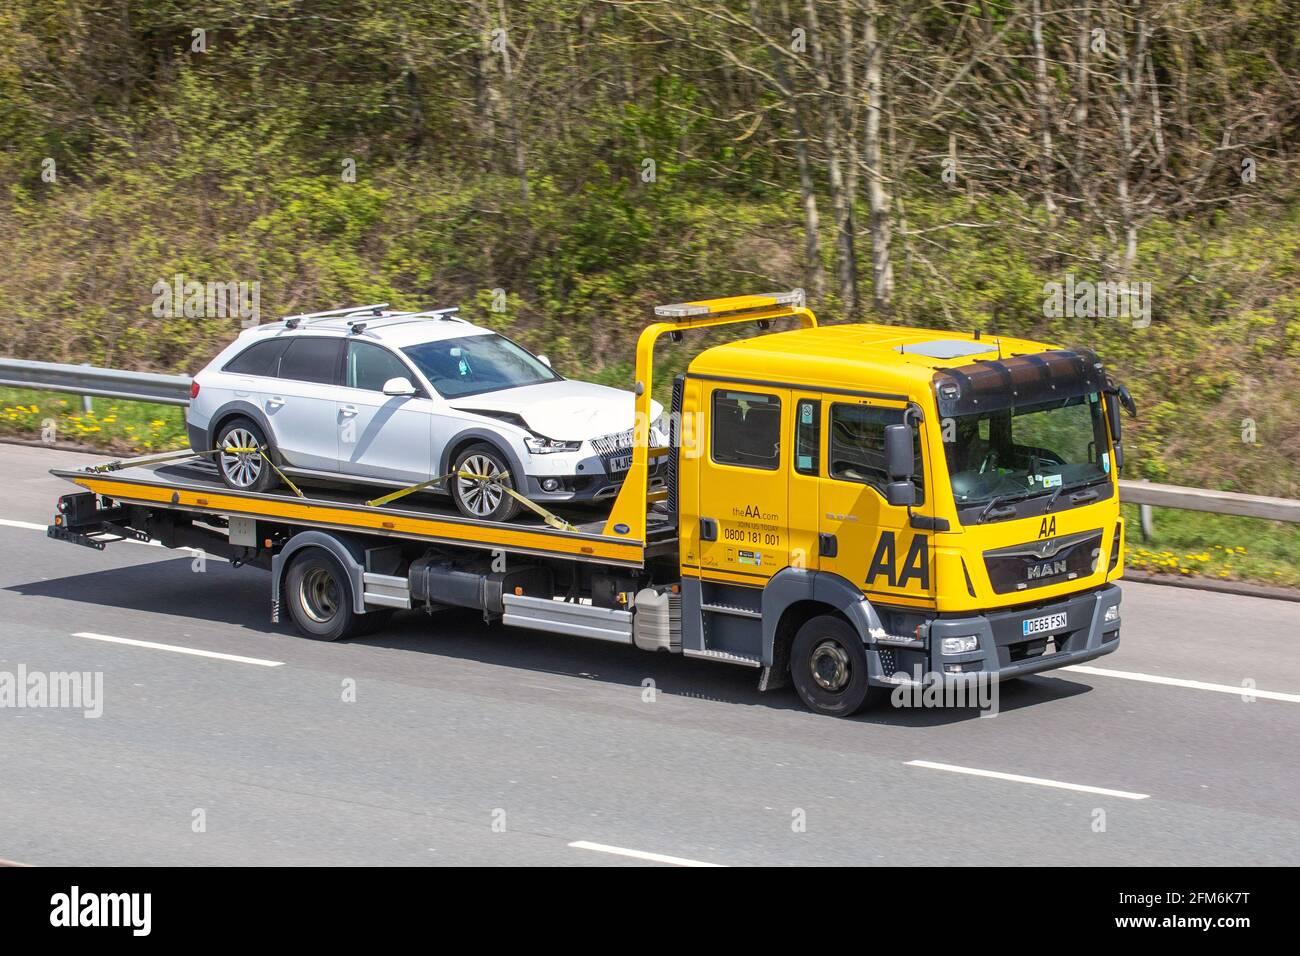 Crashed 2015 Audi Allroad Tdi Quattro being transported by AA 24hr roadside accident rescure vehicle; Stock Photo